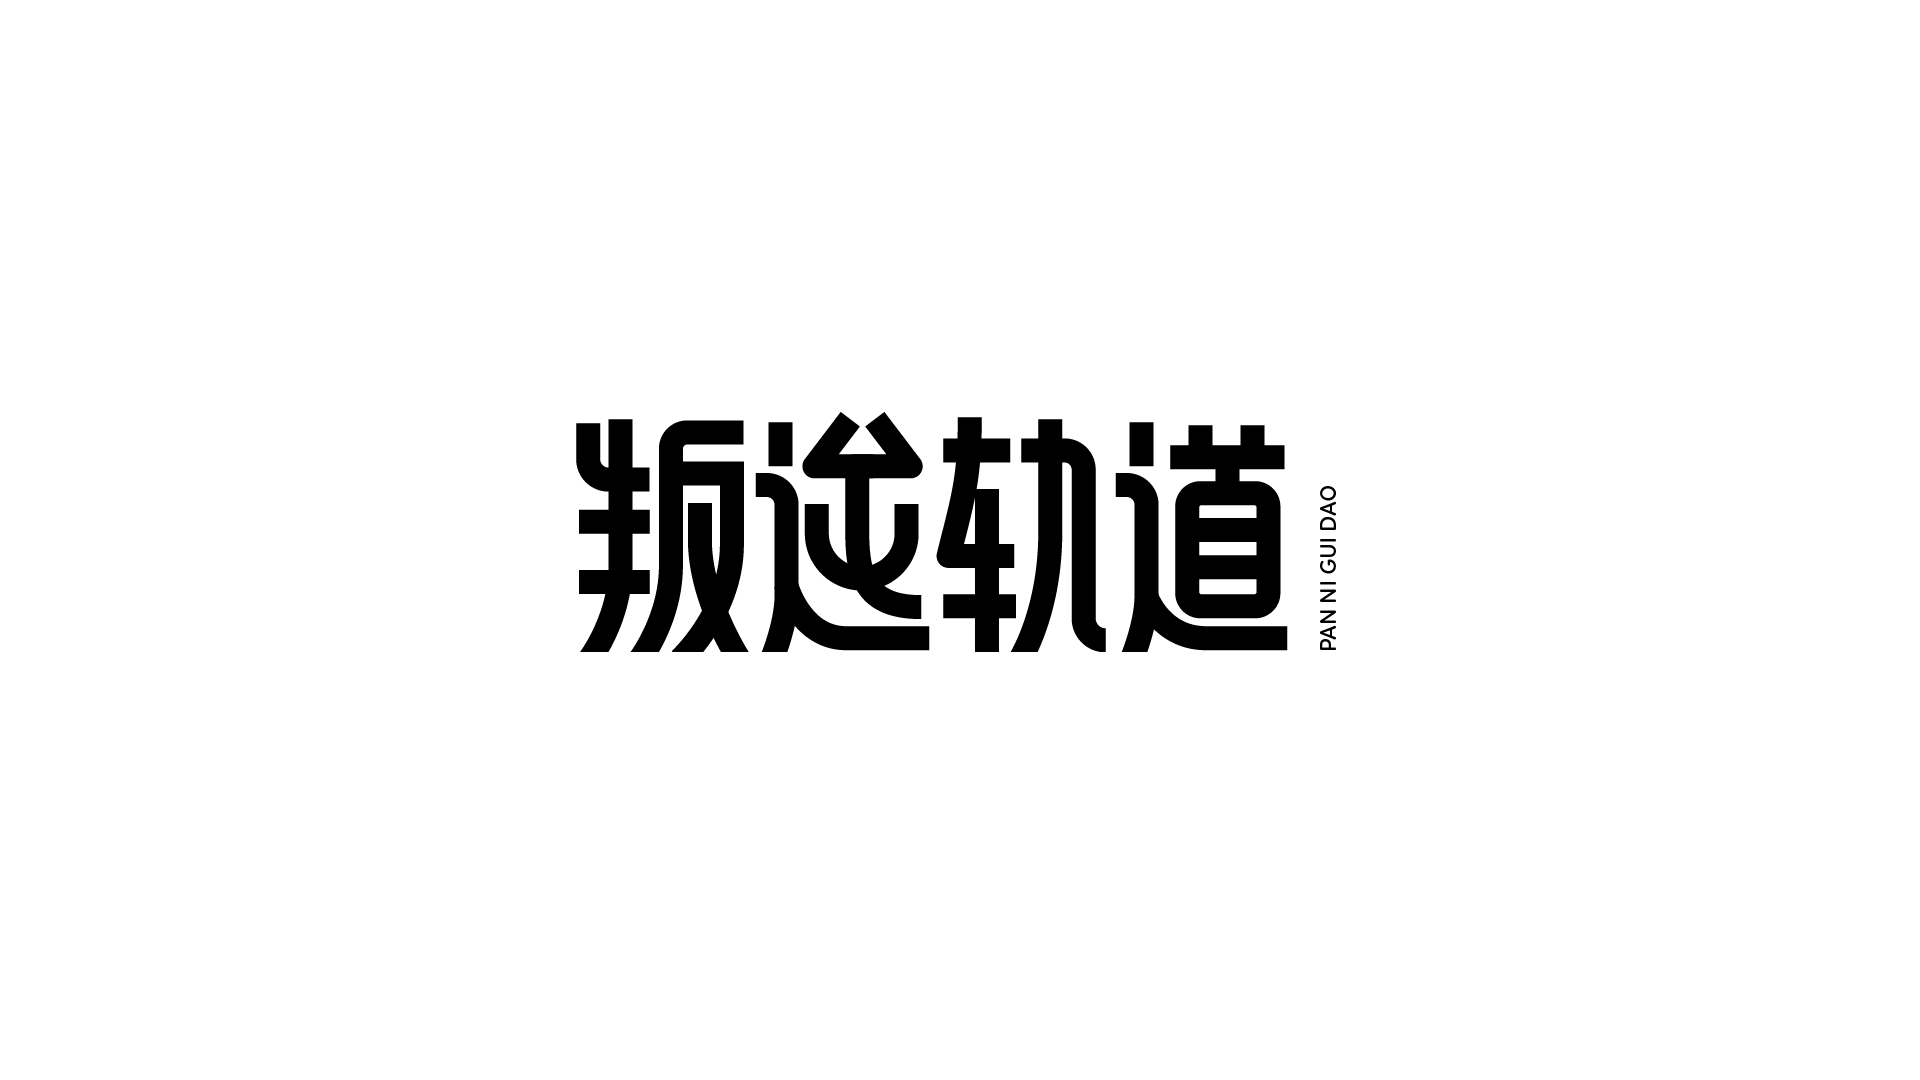 20P Collection of the latest Chinese font design schemes in 2021 #.603